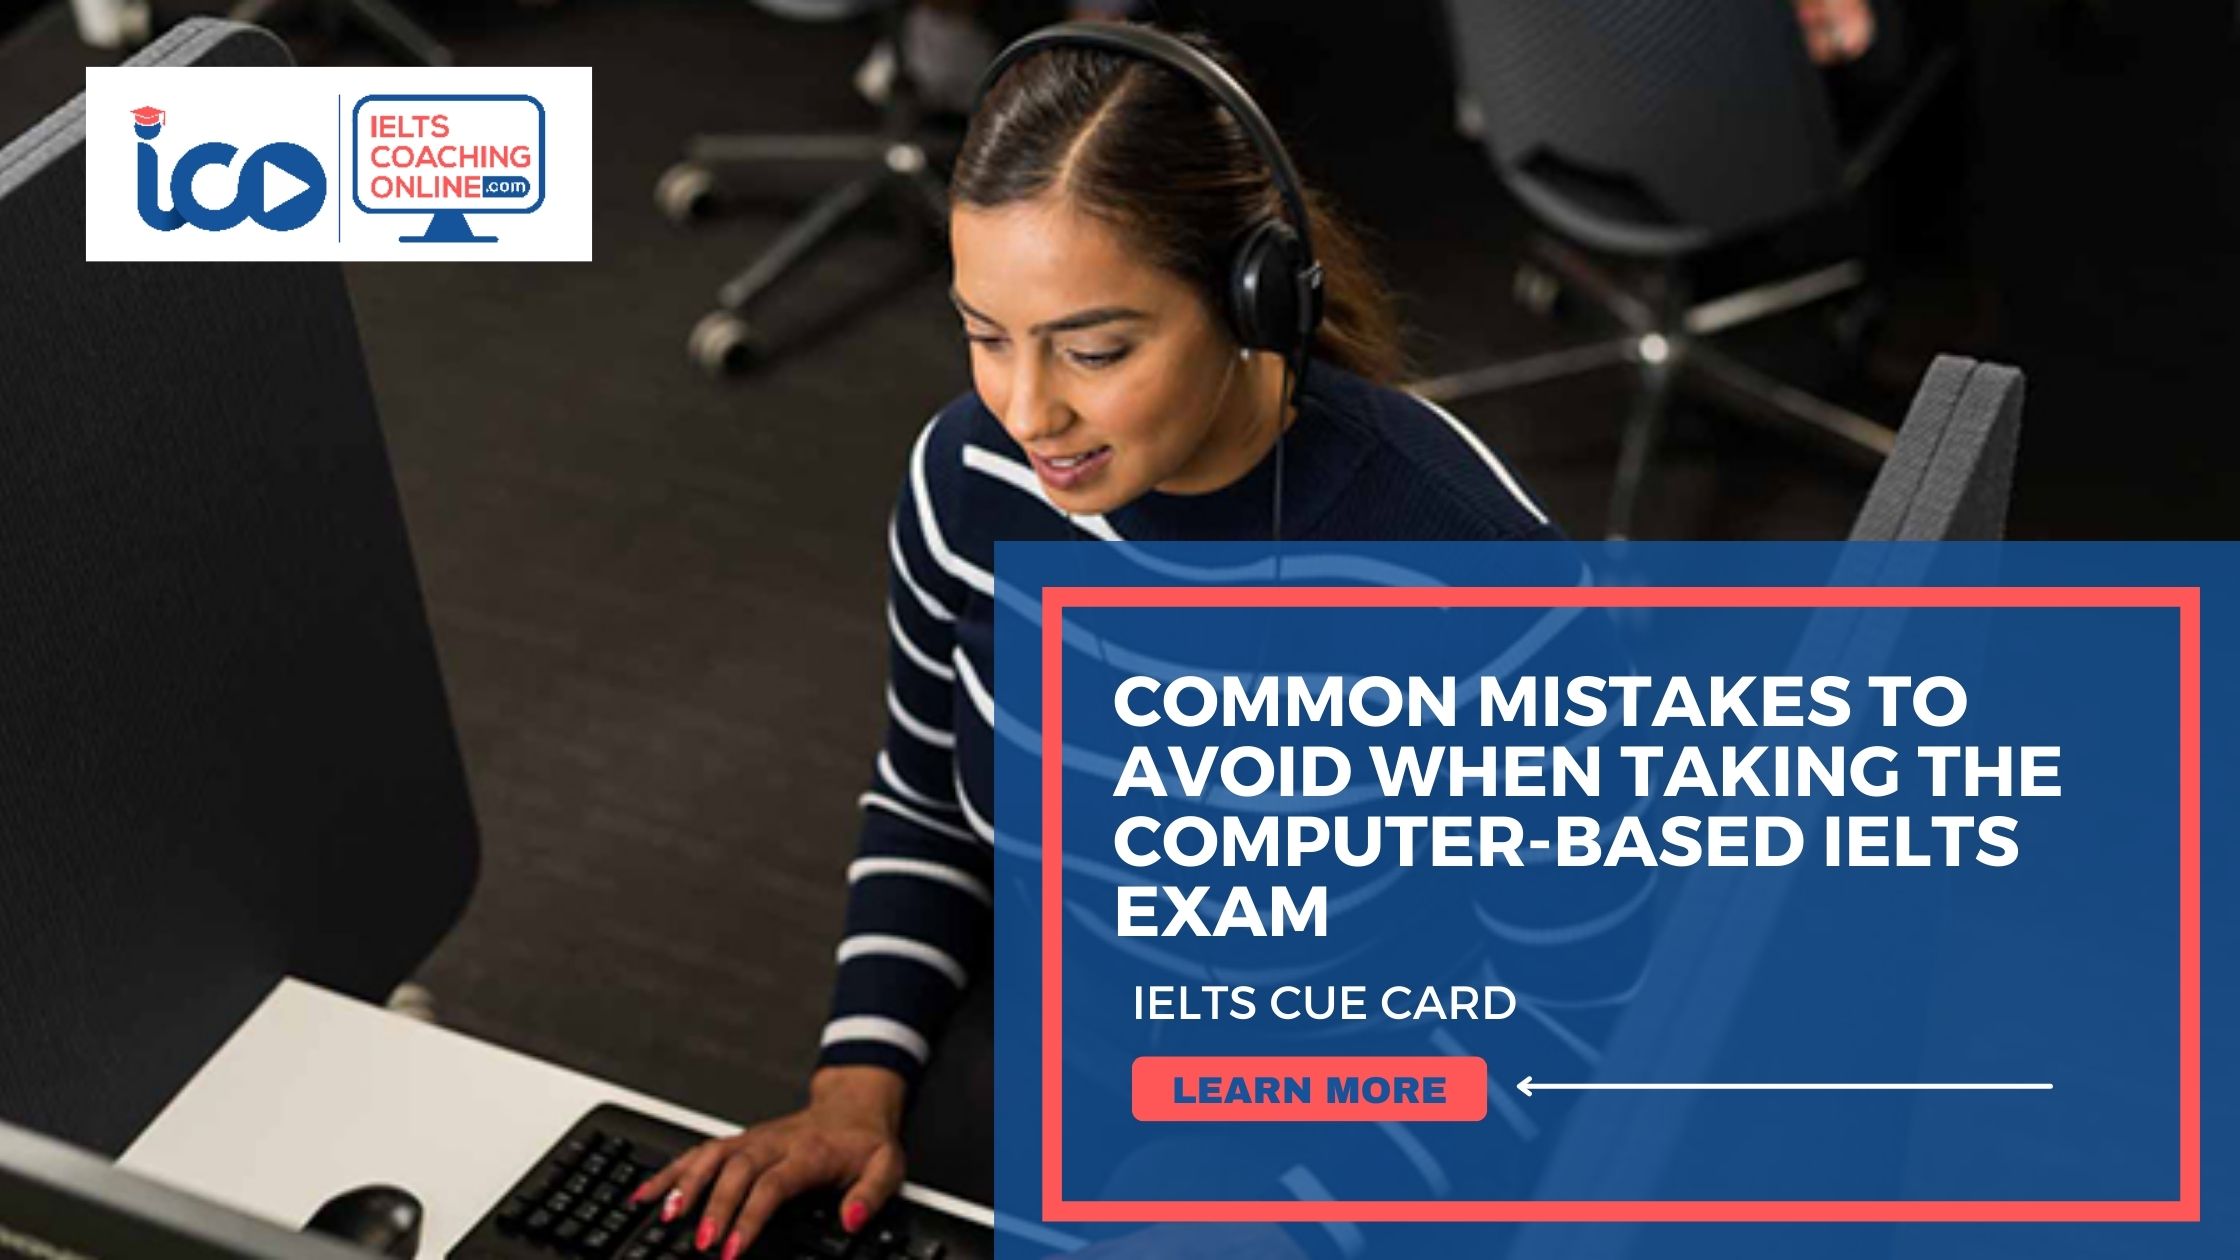 Common Mistakes to Avoid When Taking the Computer-Based IELTS Exam